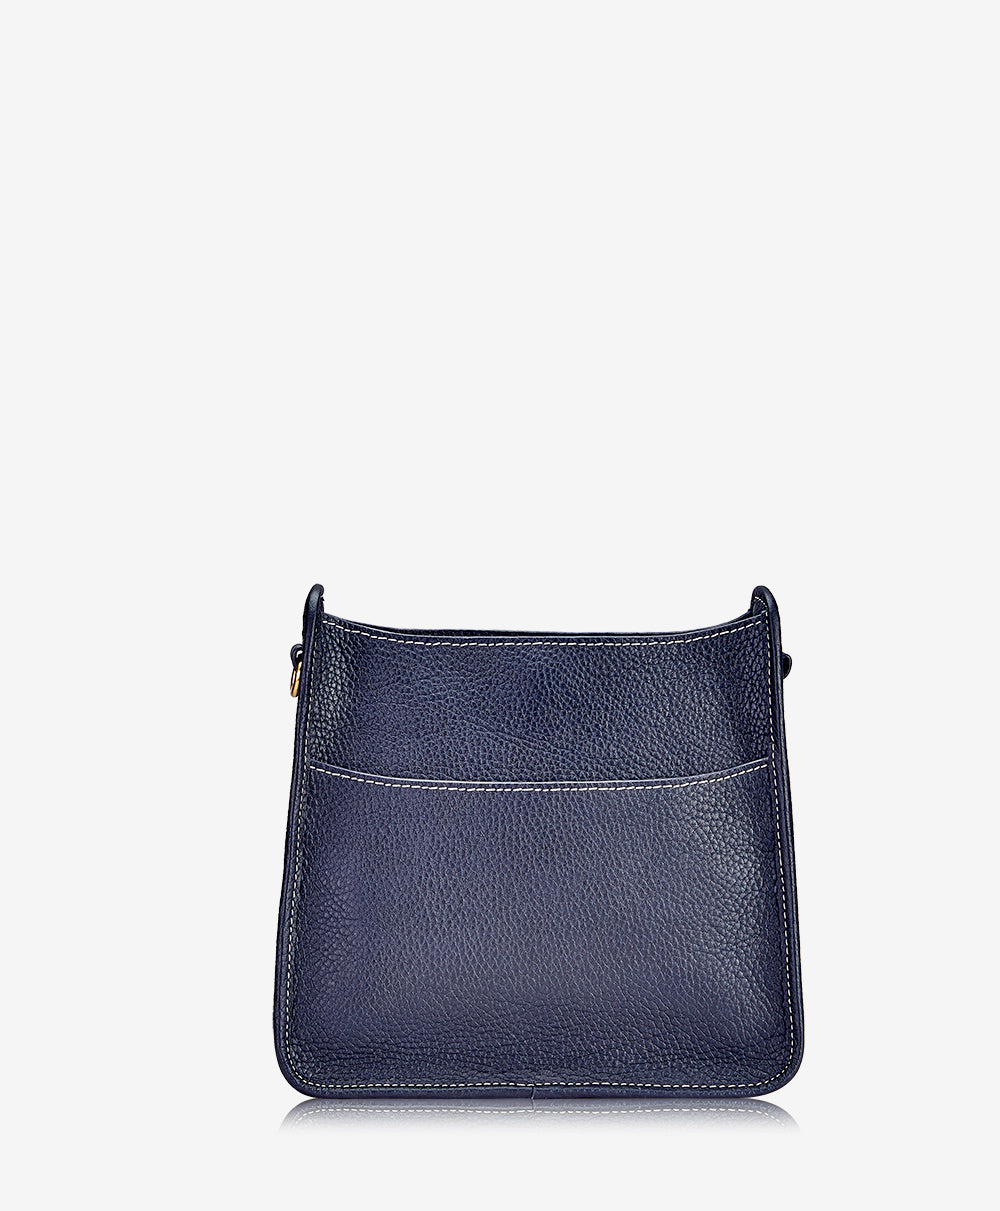 Best Women's Small Navy Leather Crossbody Purses - Reviews & Ratings ::  Clothing-shoes-accessories-for-women | Bags, Purses crossbody, Crossbody bag